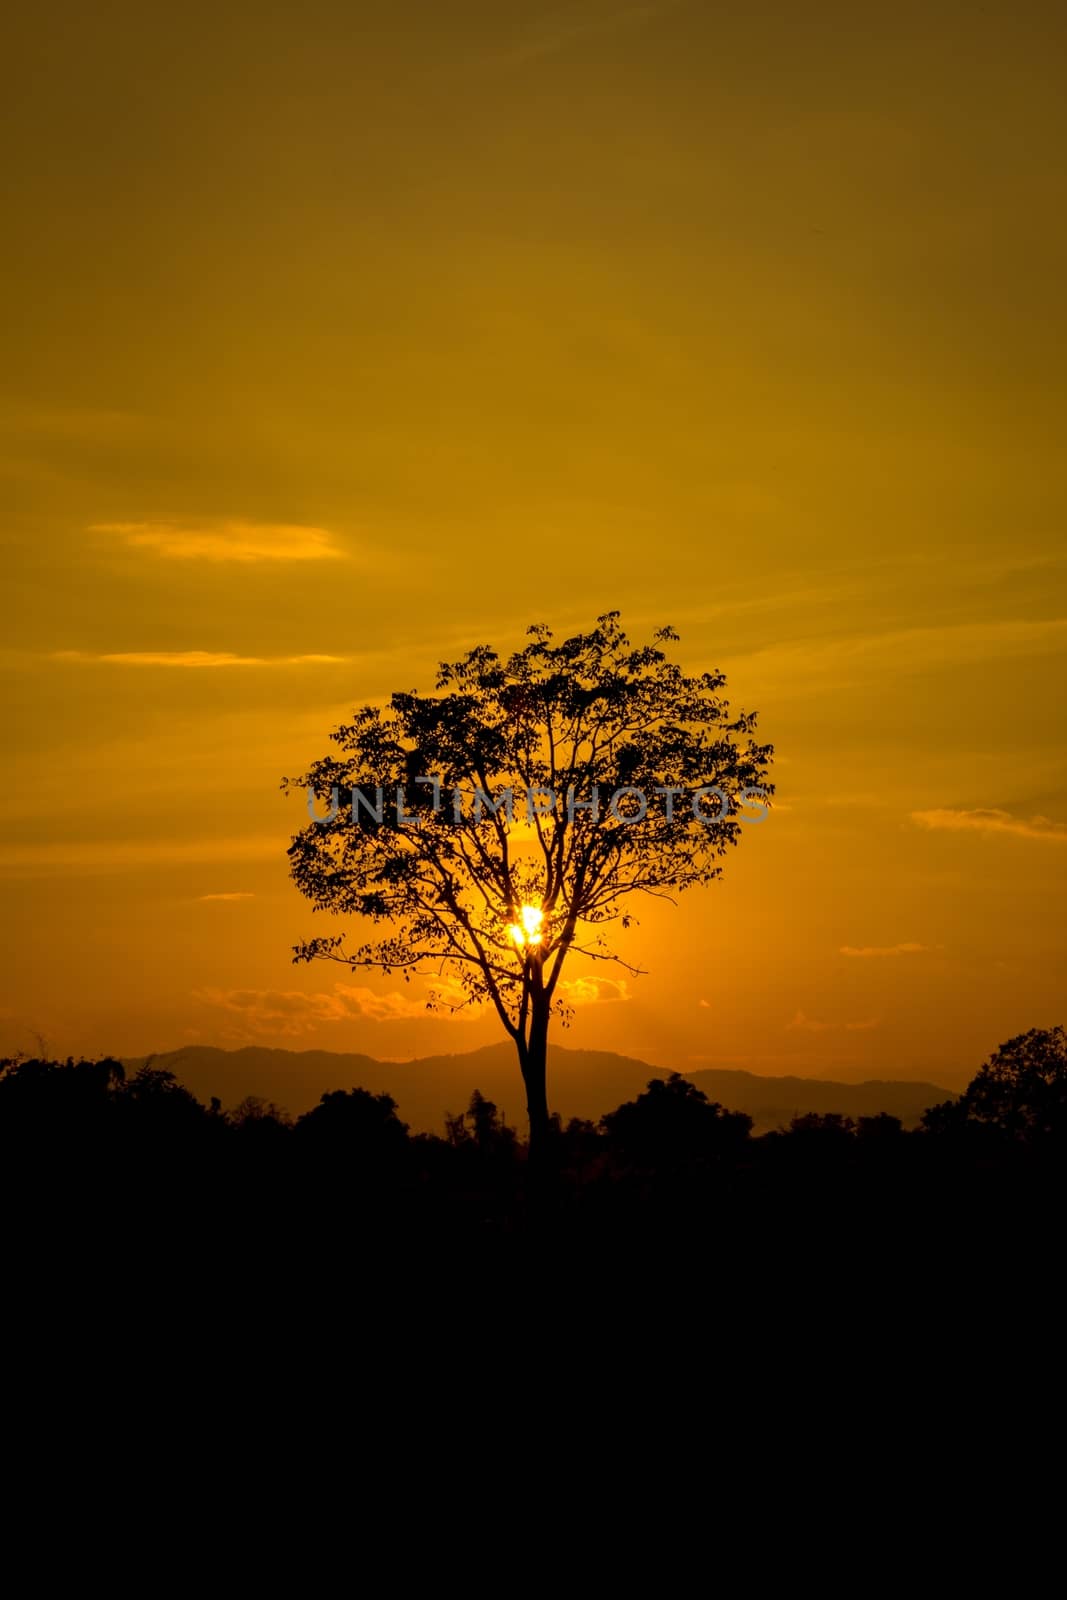 Beautiful landscape image with sun and trees silhouette at sunset.